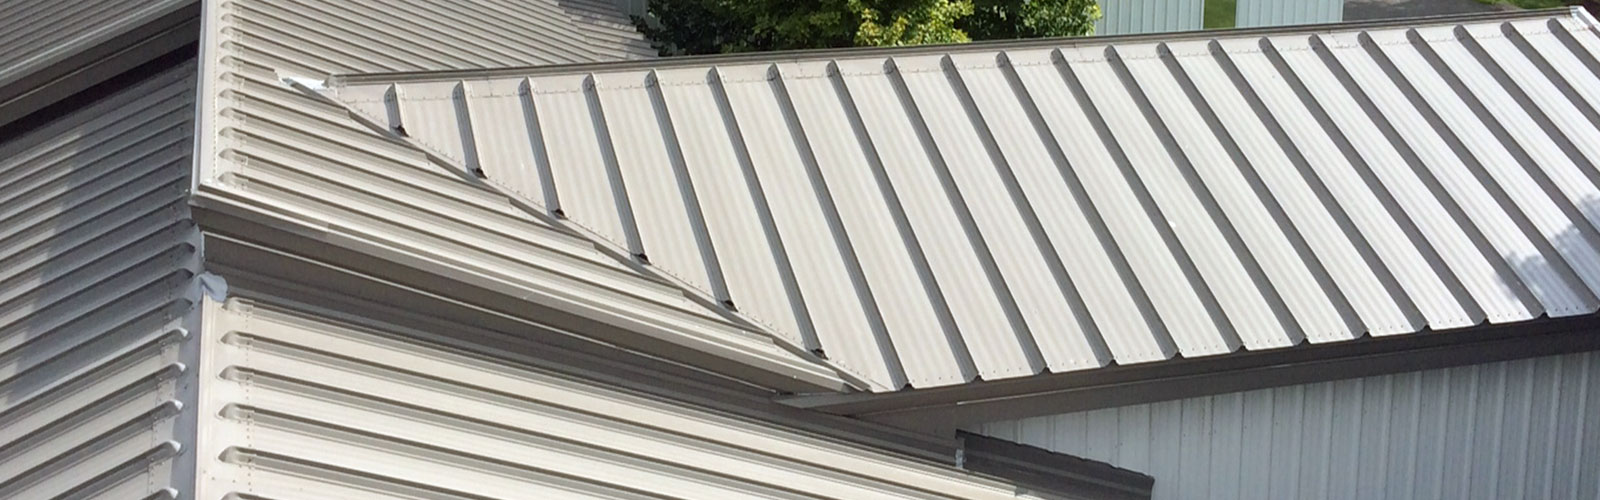 Roof Tech Images